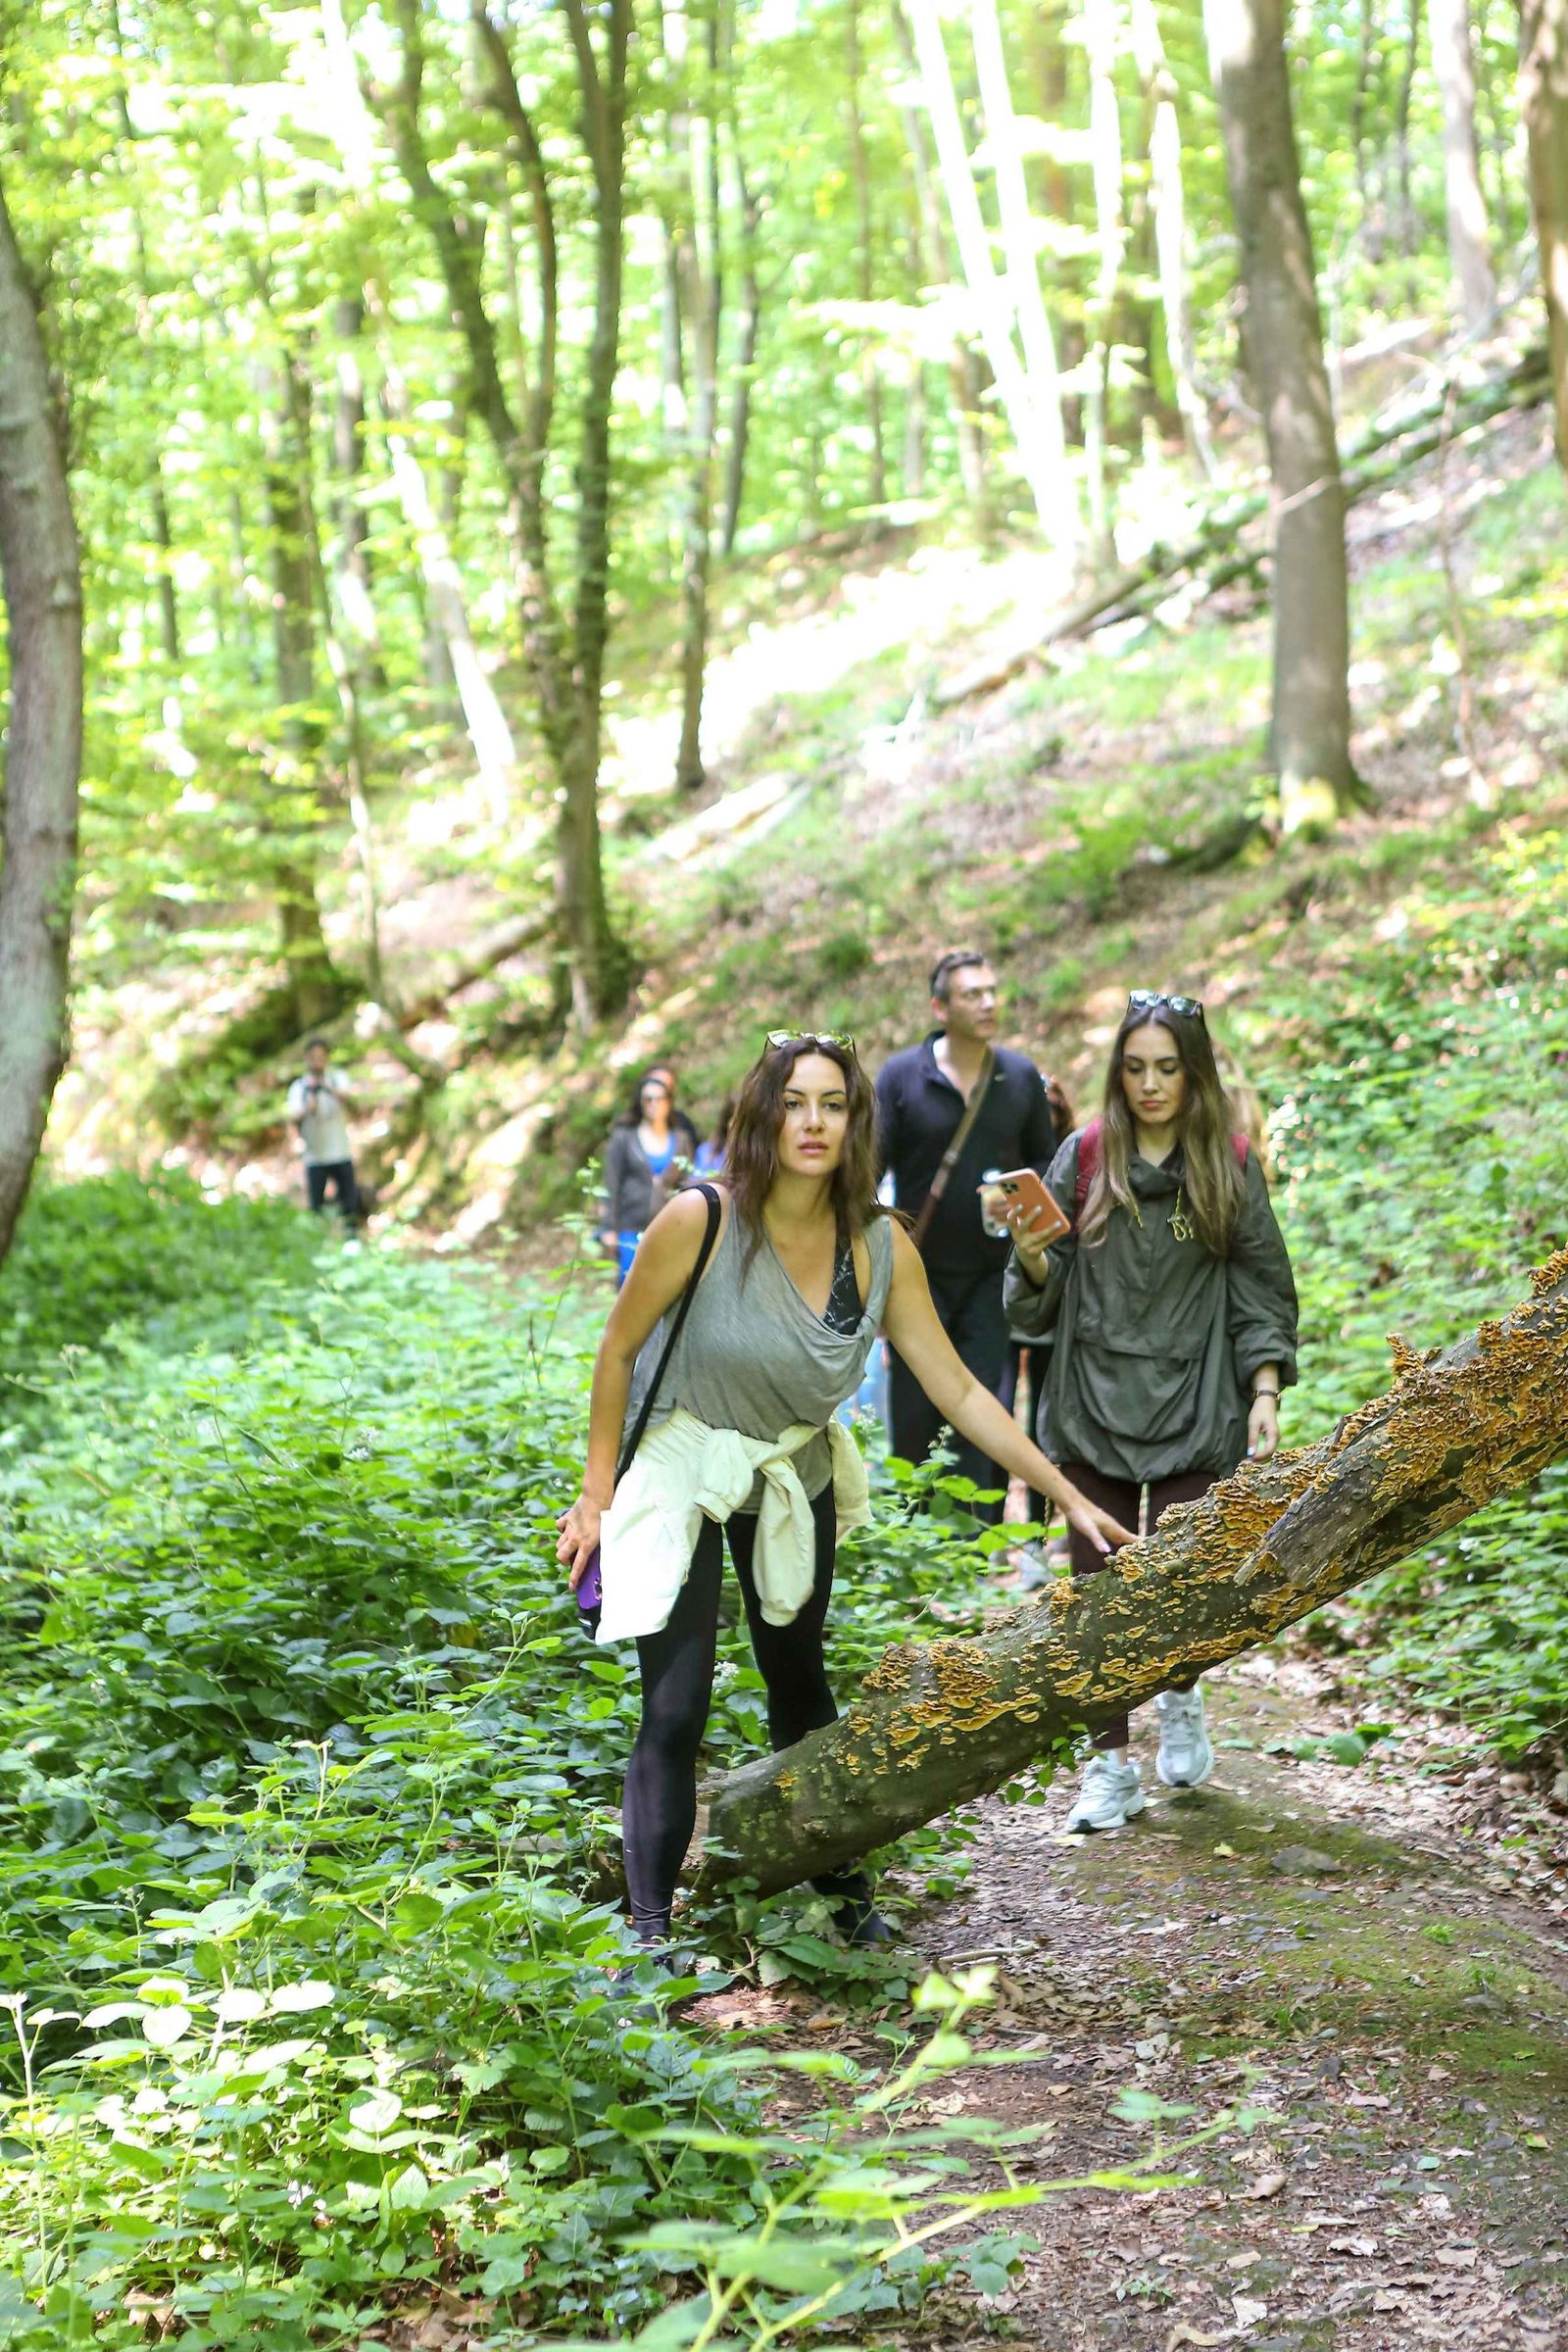 Ayşe Tolga Forest Therapy Seamlesstance Nature Experience (1)